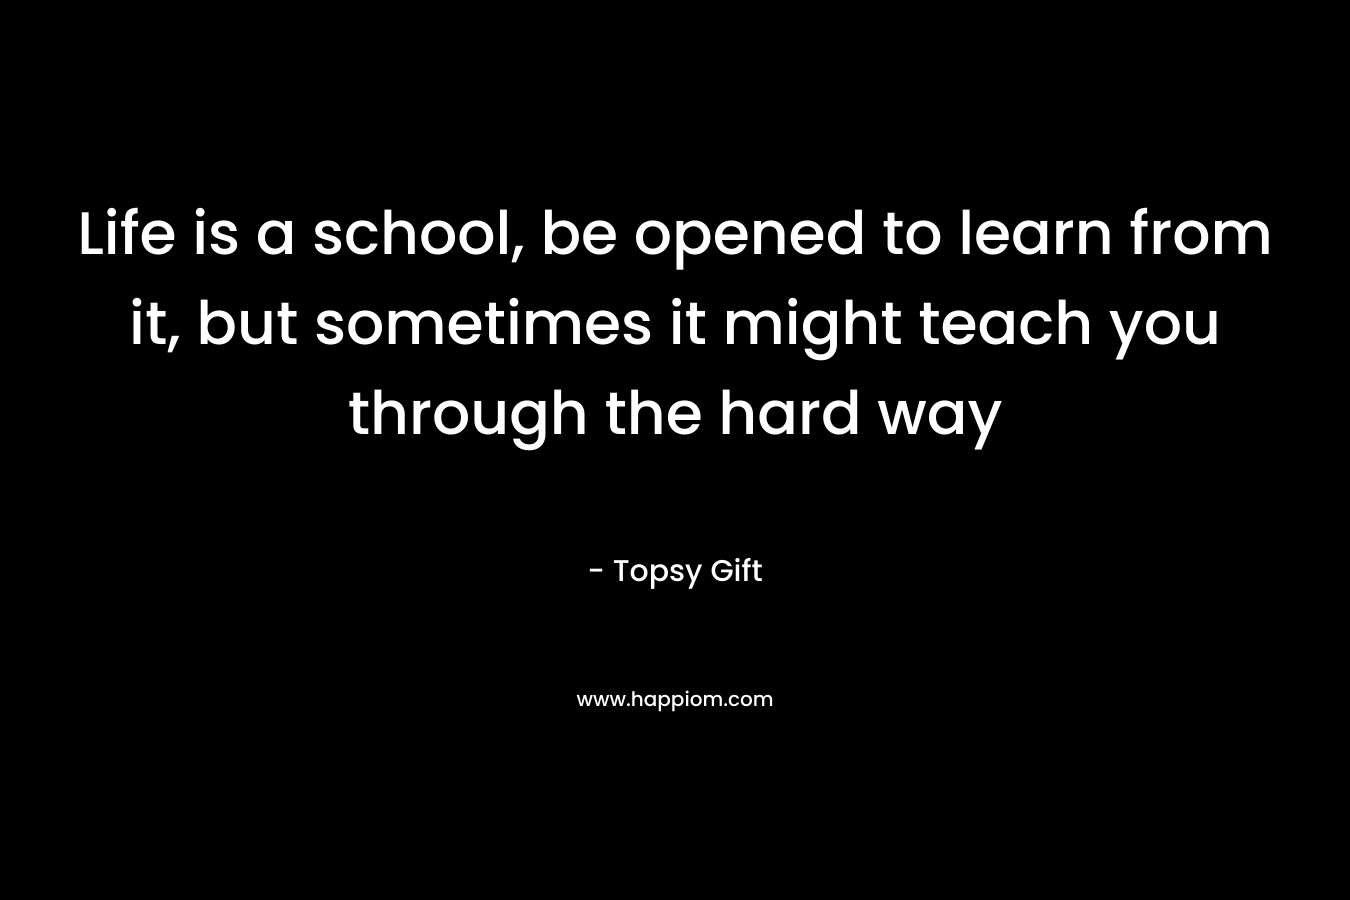 Life is a school, be opened to learn from it, but sometimes it might teach you through the hard way – Topsy Gift